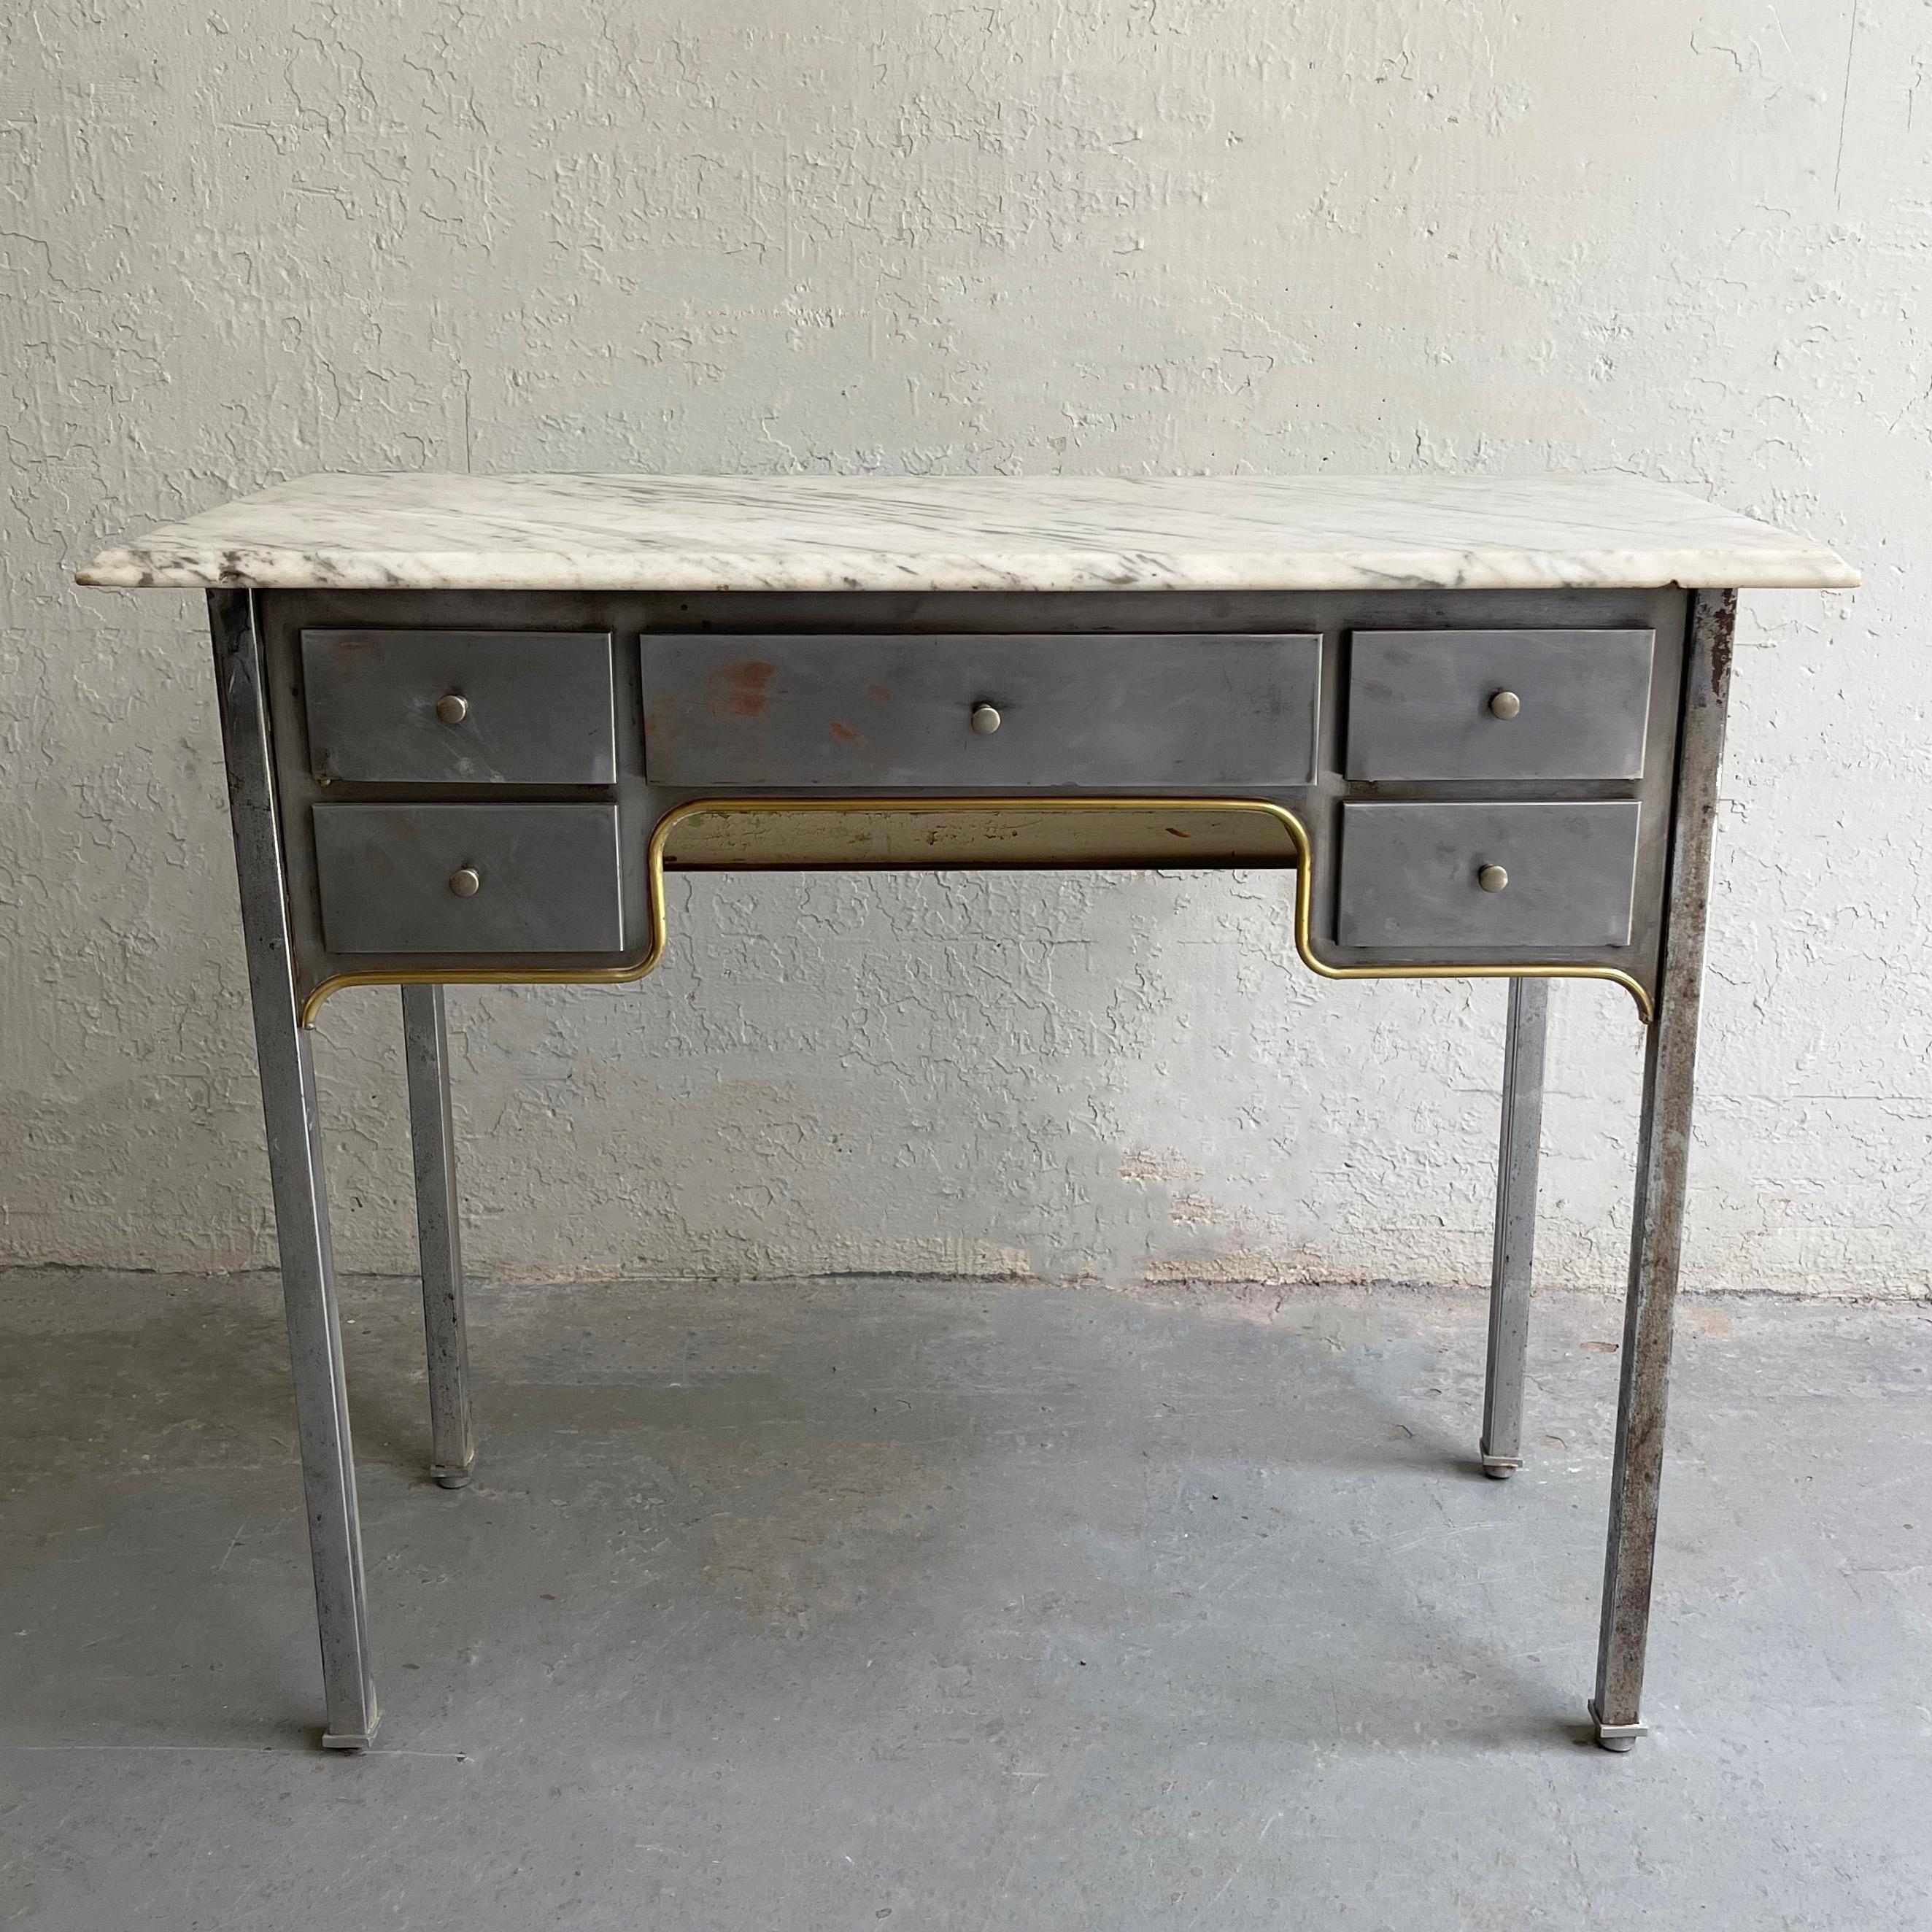 Early 20th century, industrial, brushed steel desk features a contrasting white marble top with beveled edge and five drawers with brass trim underneath them. This petite piece works beautifullly as a small desk, a vanity or entryway table. The